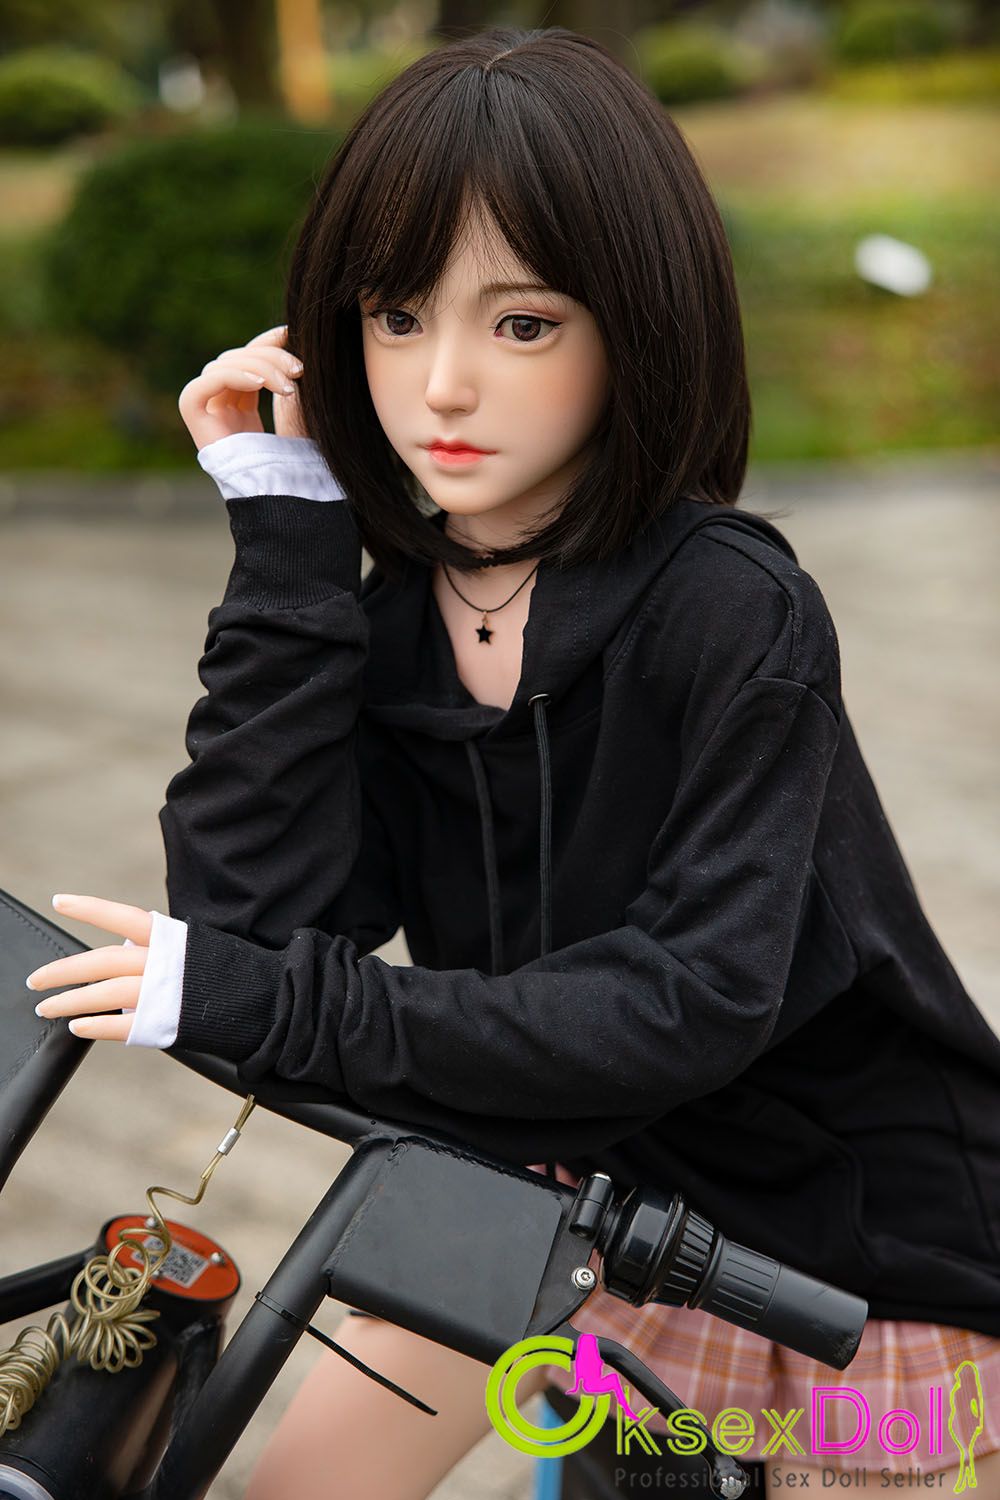 Girl Dolls Pictures